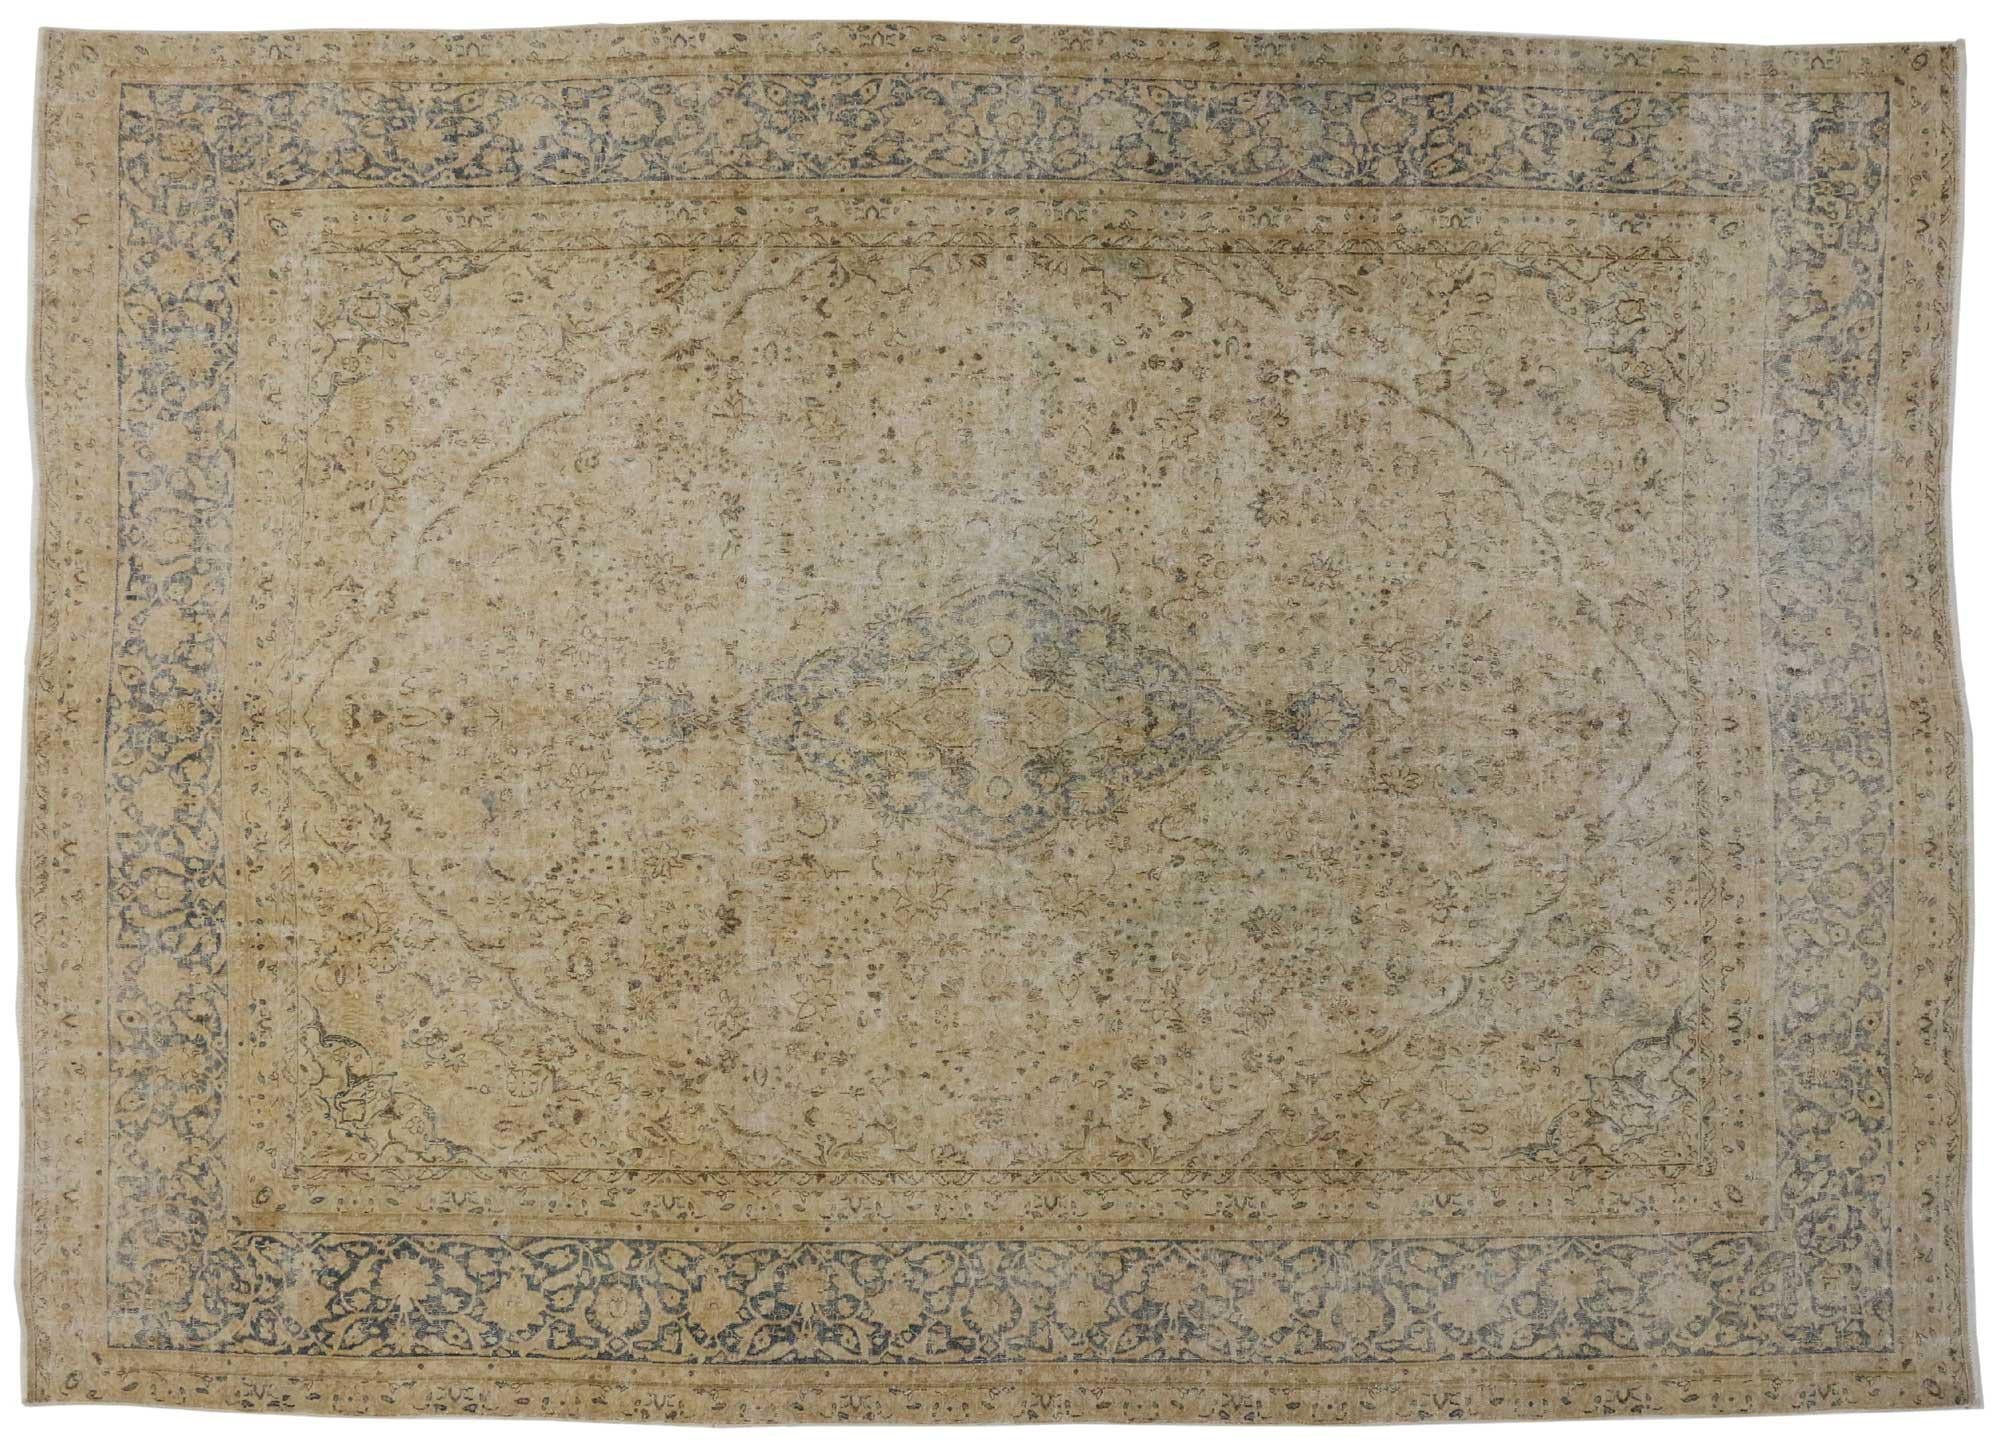 Kirman Distressed Vintage Persian Kerman Area Rug with English Country Cottage Style